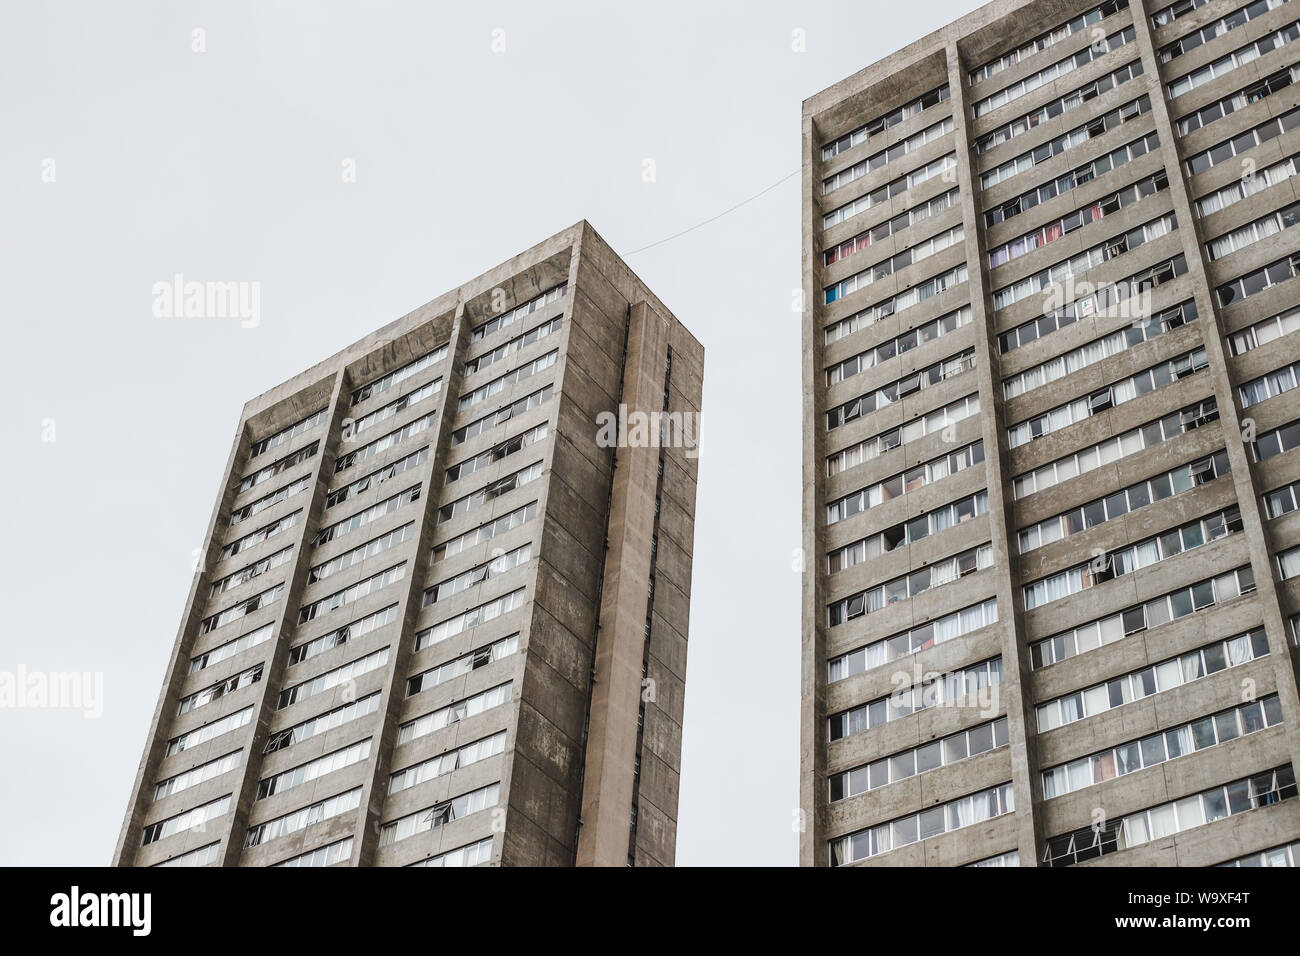 Dull looming towers of public housing flats against a cloudy sky Stock Photo